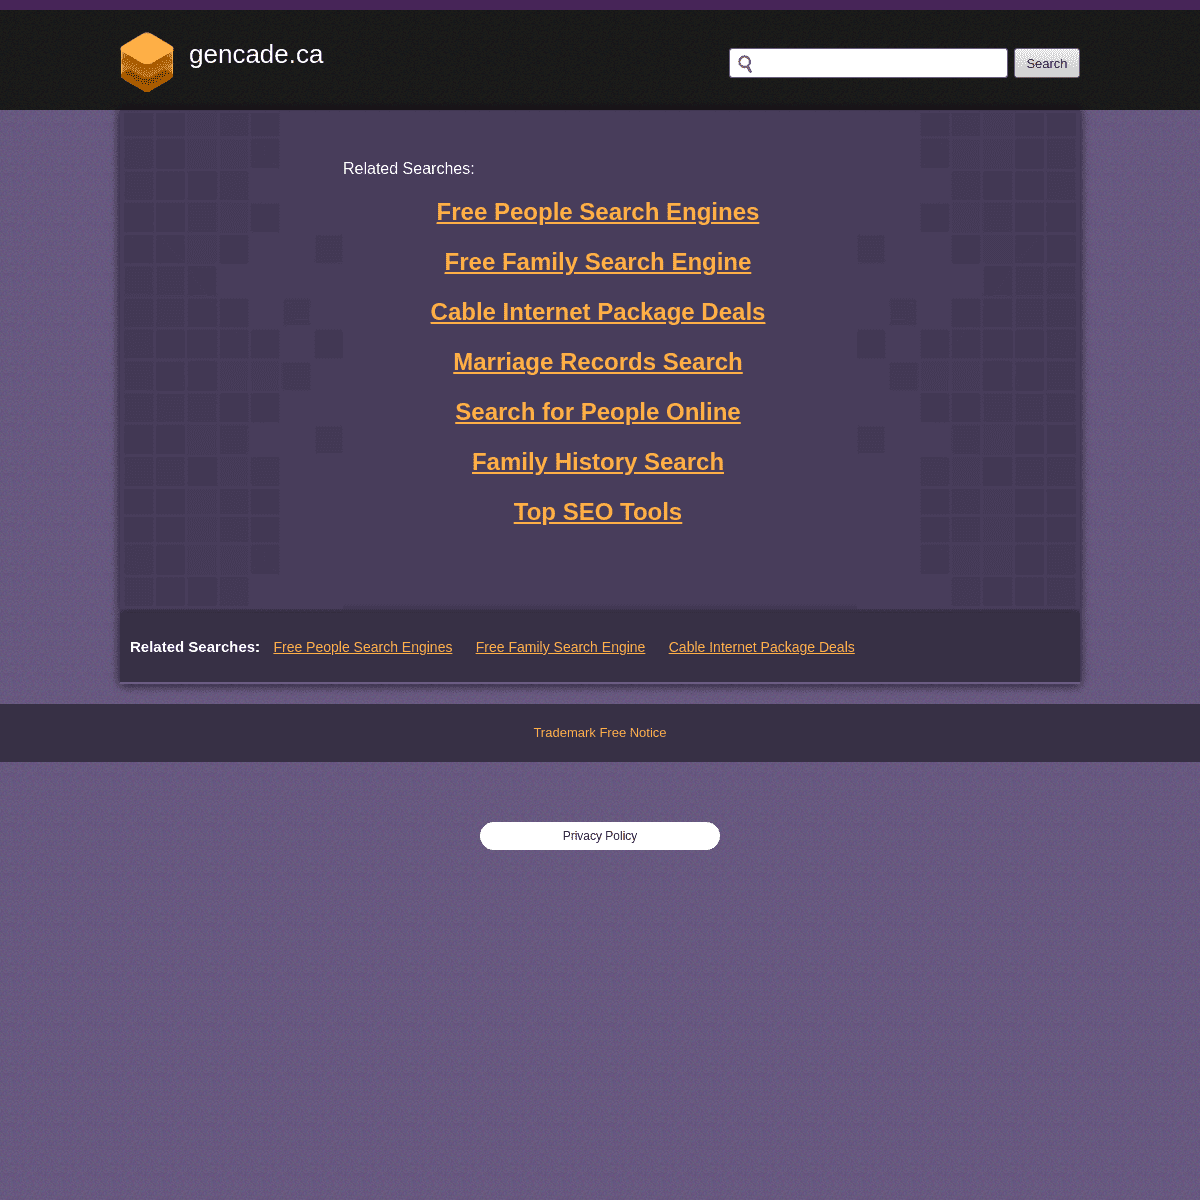 A complete backup of https://gencade.ca